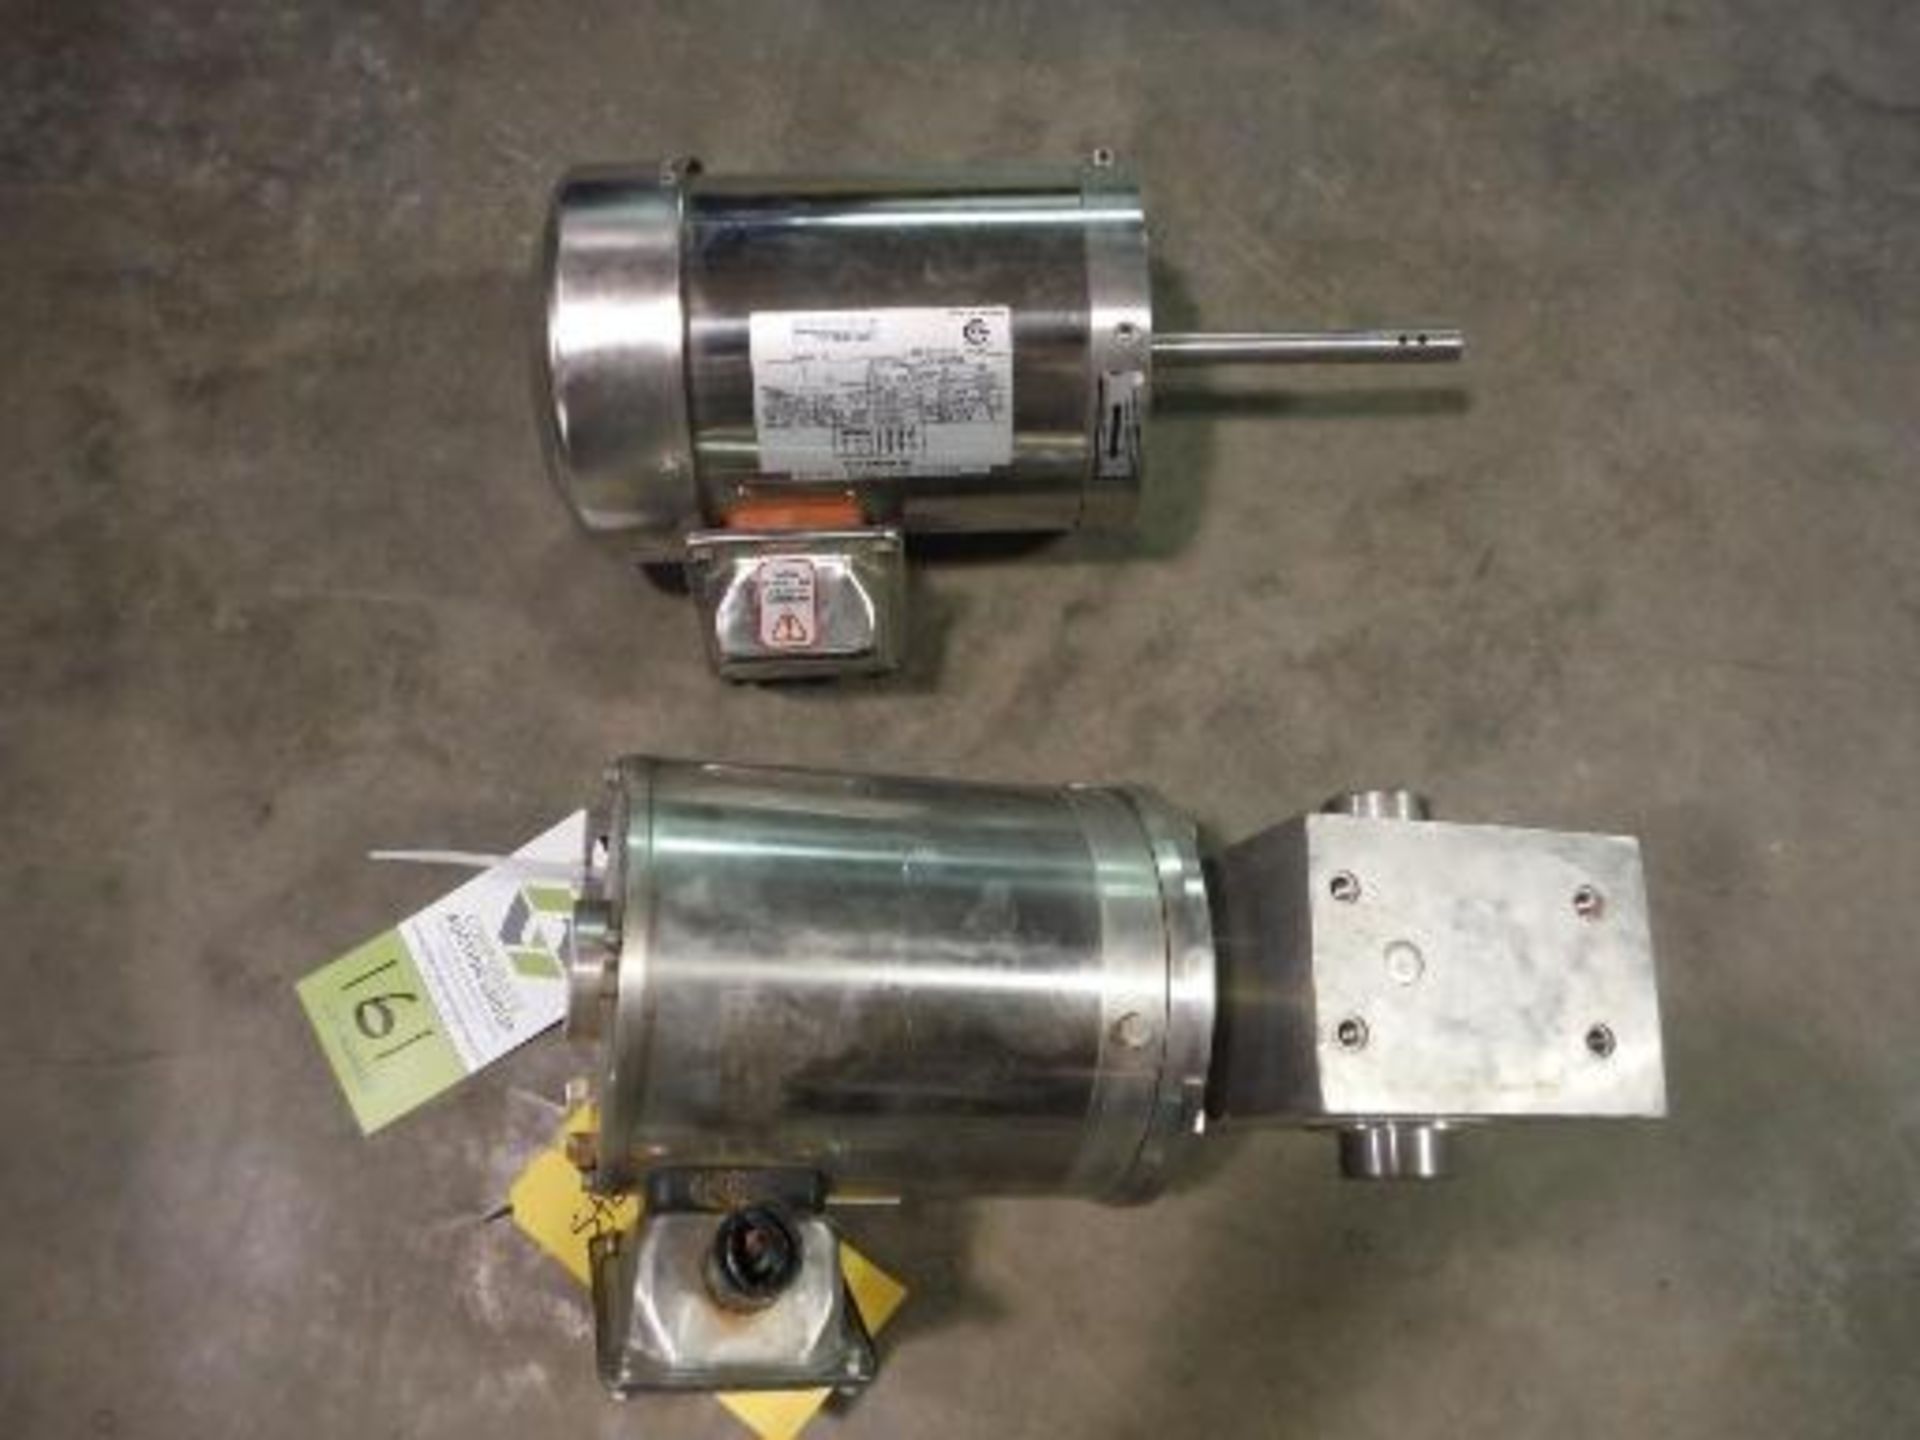 Sterling Electric 1 HP Motor, 3-Phase, Frame-56CZ (without gearbox), Sterling Electric 1/2 HP Motor,